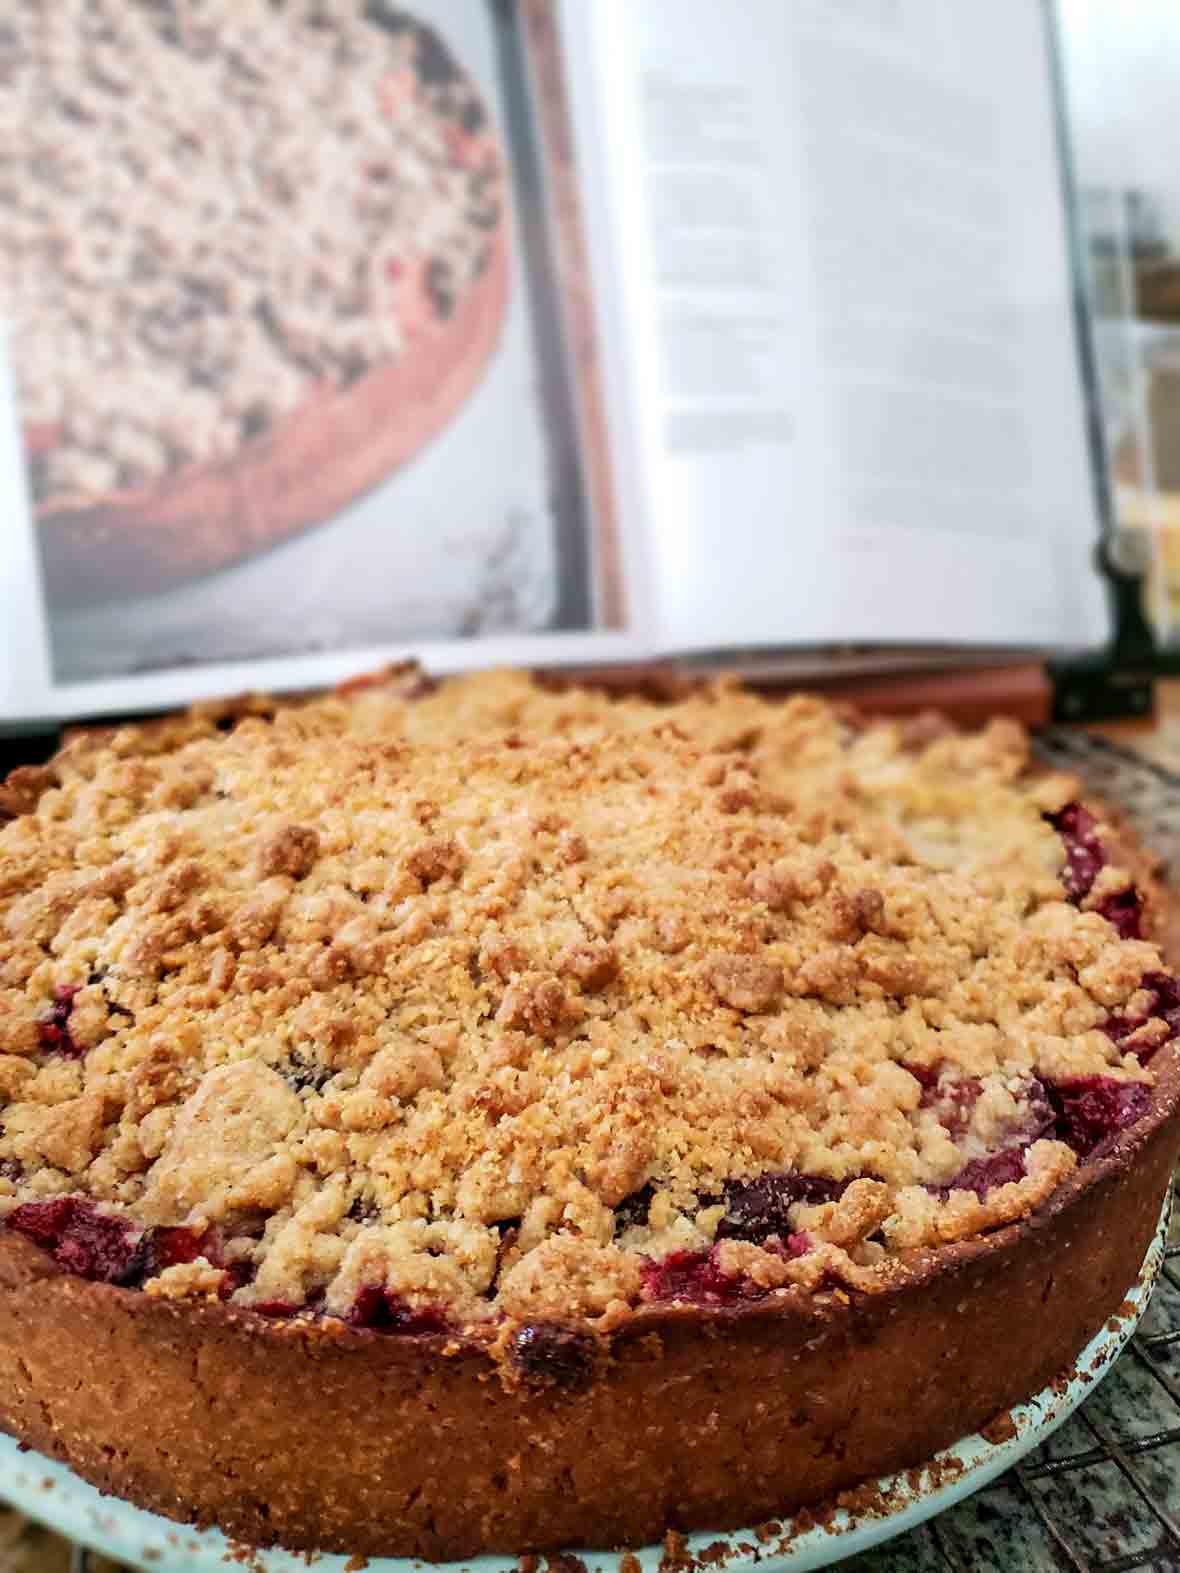 An apricot tart with a thin crust and a crumble topping on a plate in front of an open cookbook showing the same tart